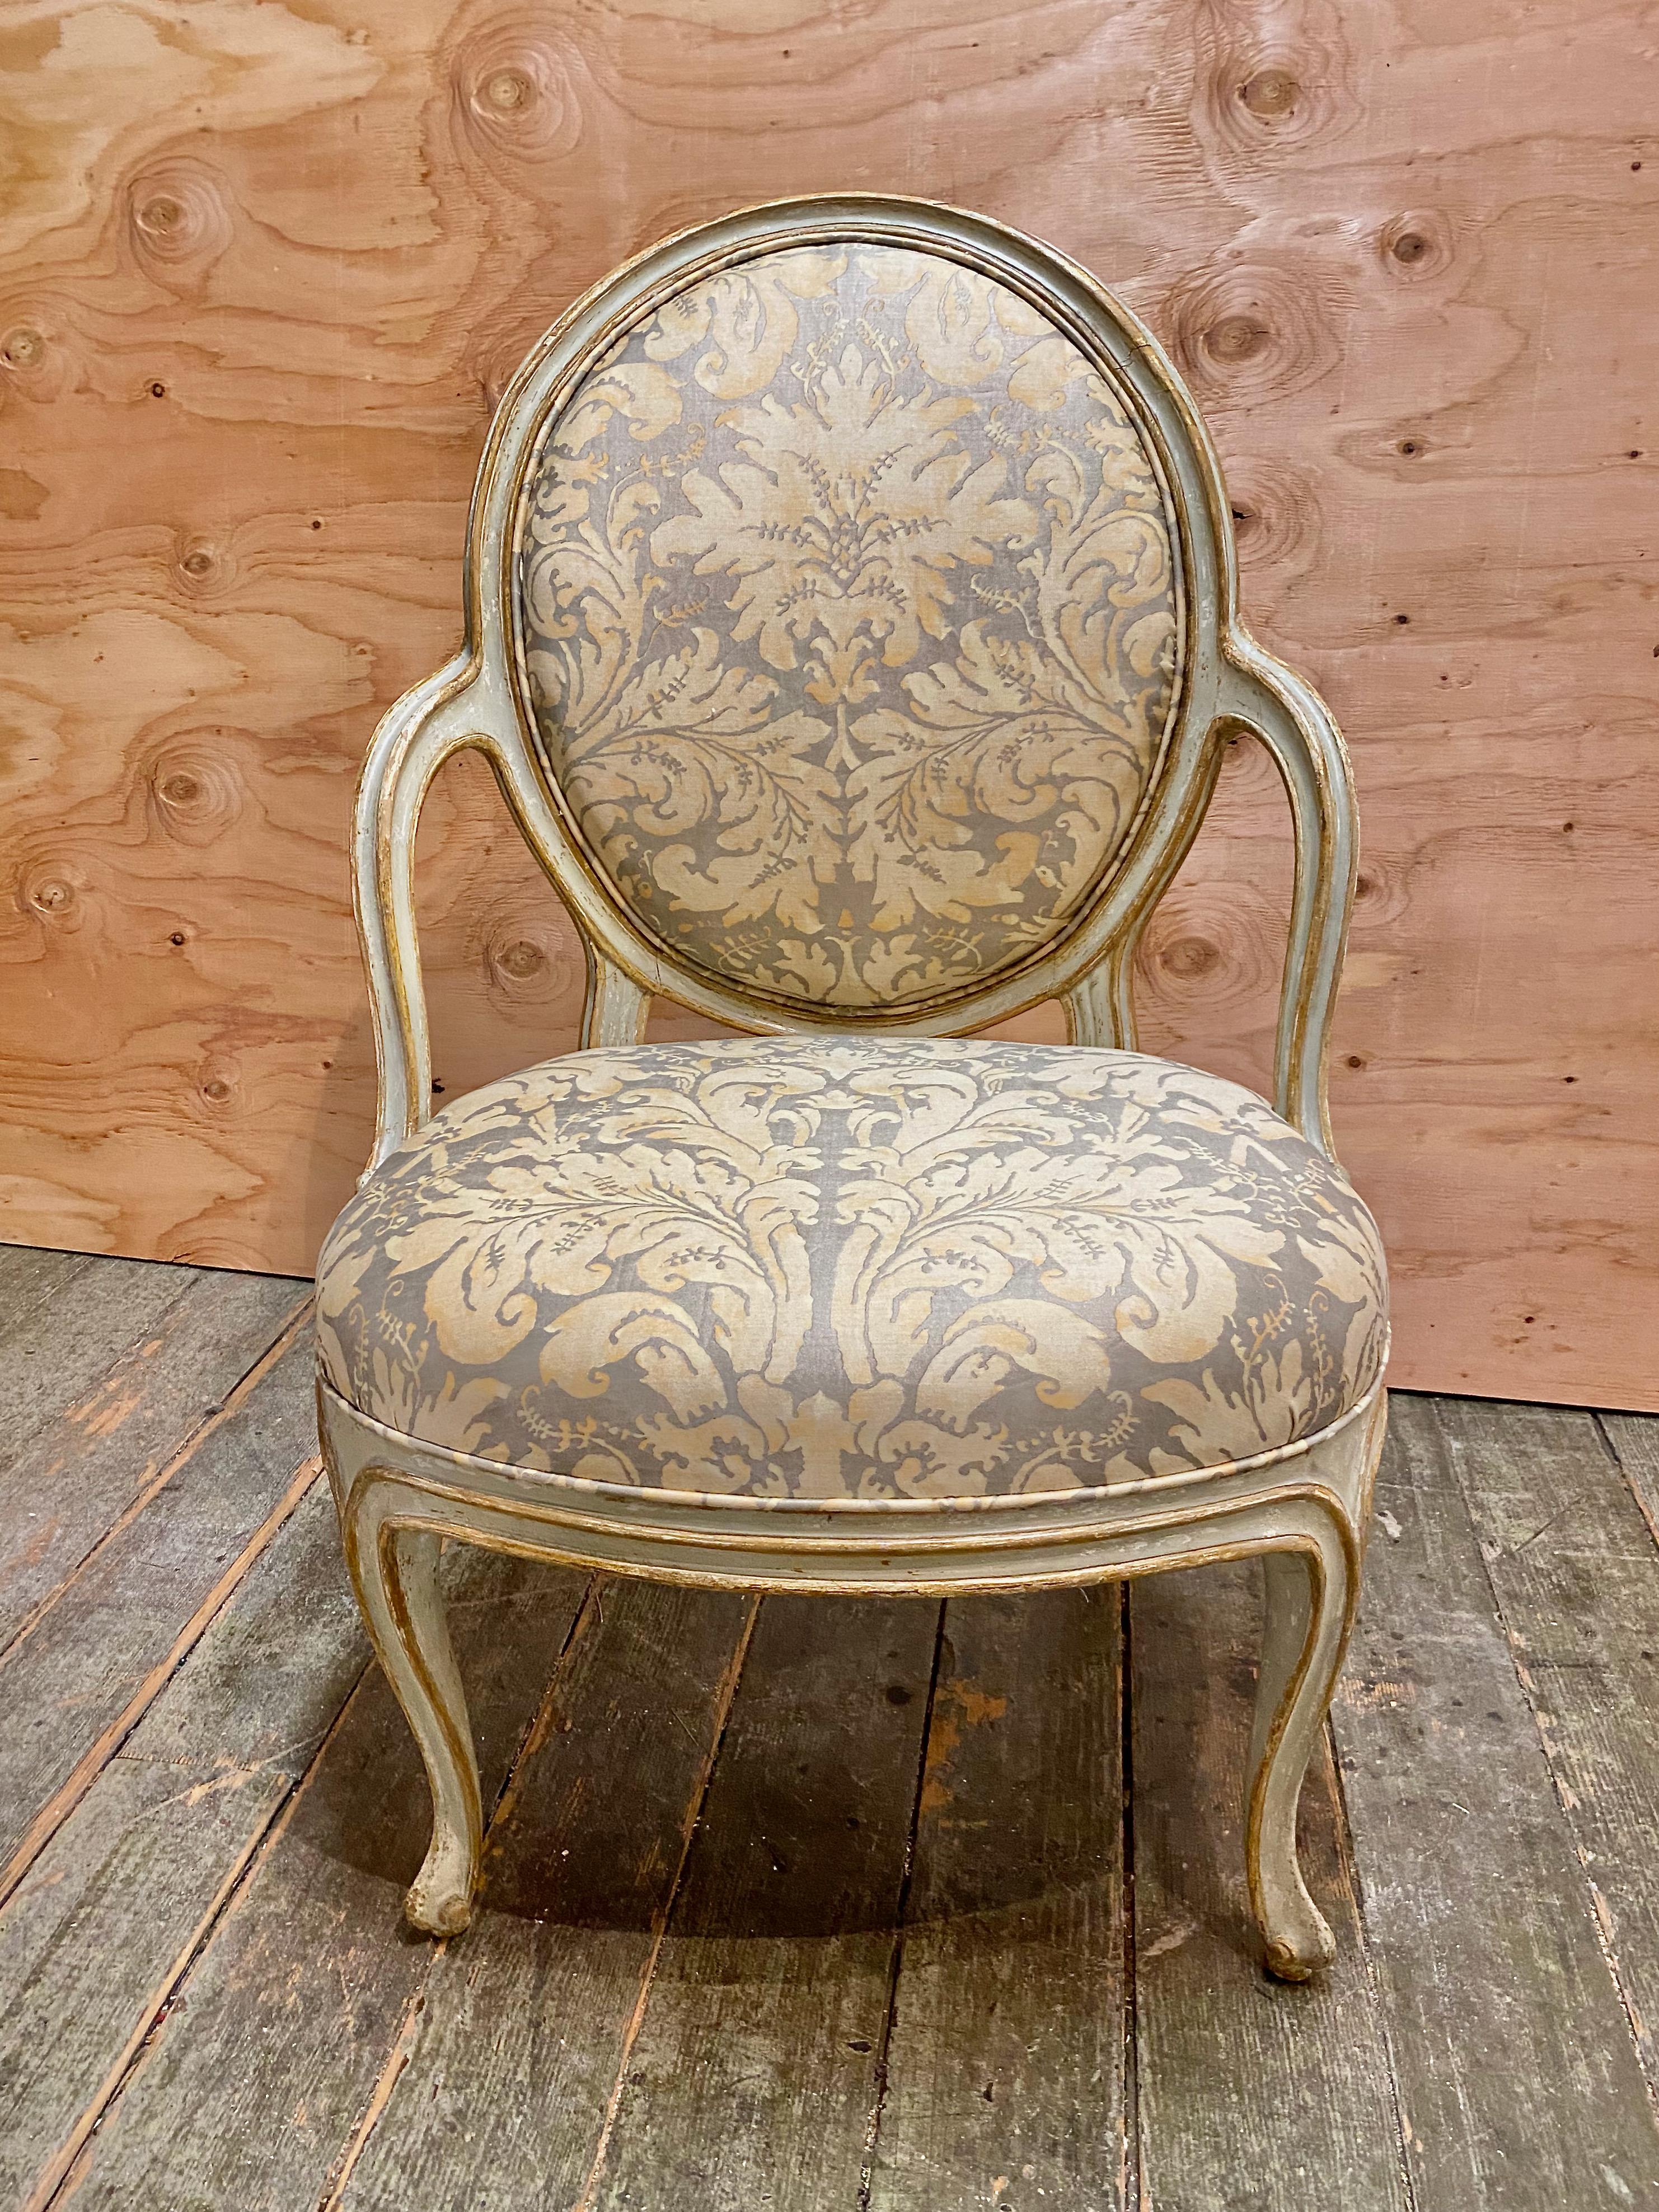 This is an exceptional pair of Adam Style George III, c. 1780 painted and gilt open arm chairs. The chairs are newly upholstered in a vintage (c.1970-1980's) Fortuny. The  vintage Fortuny has mellowed to just the right tone for the original pale